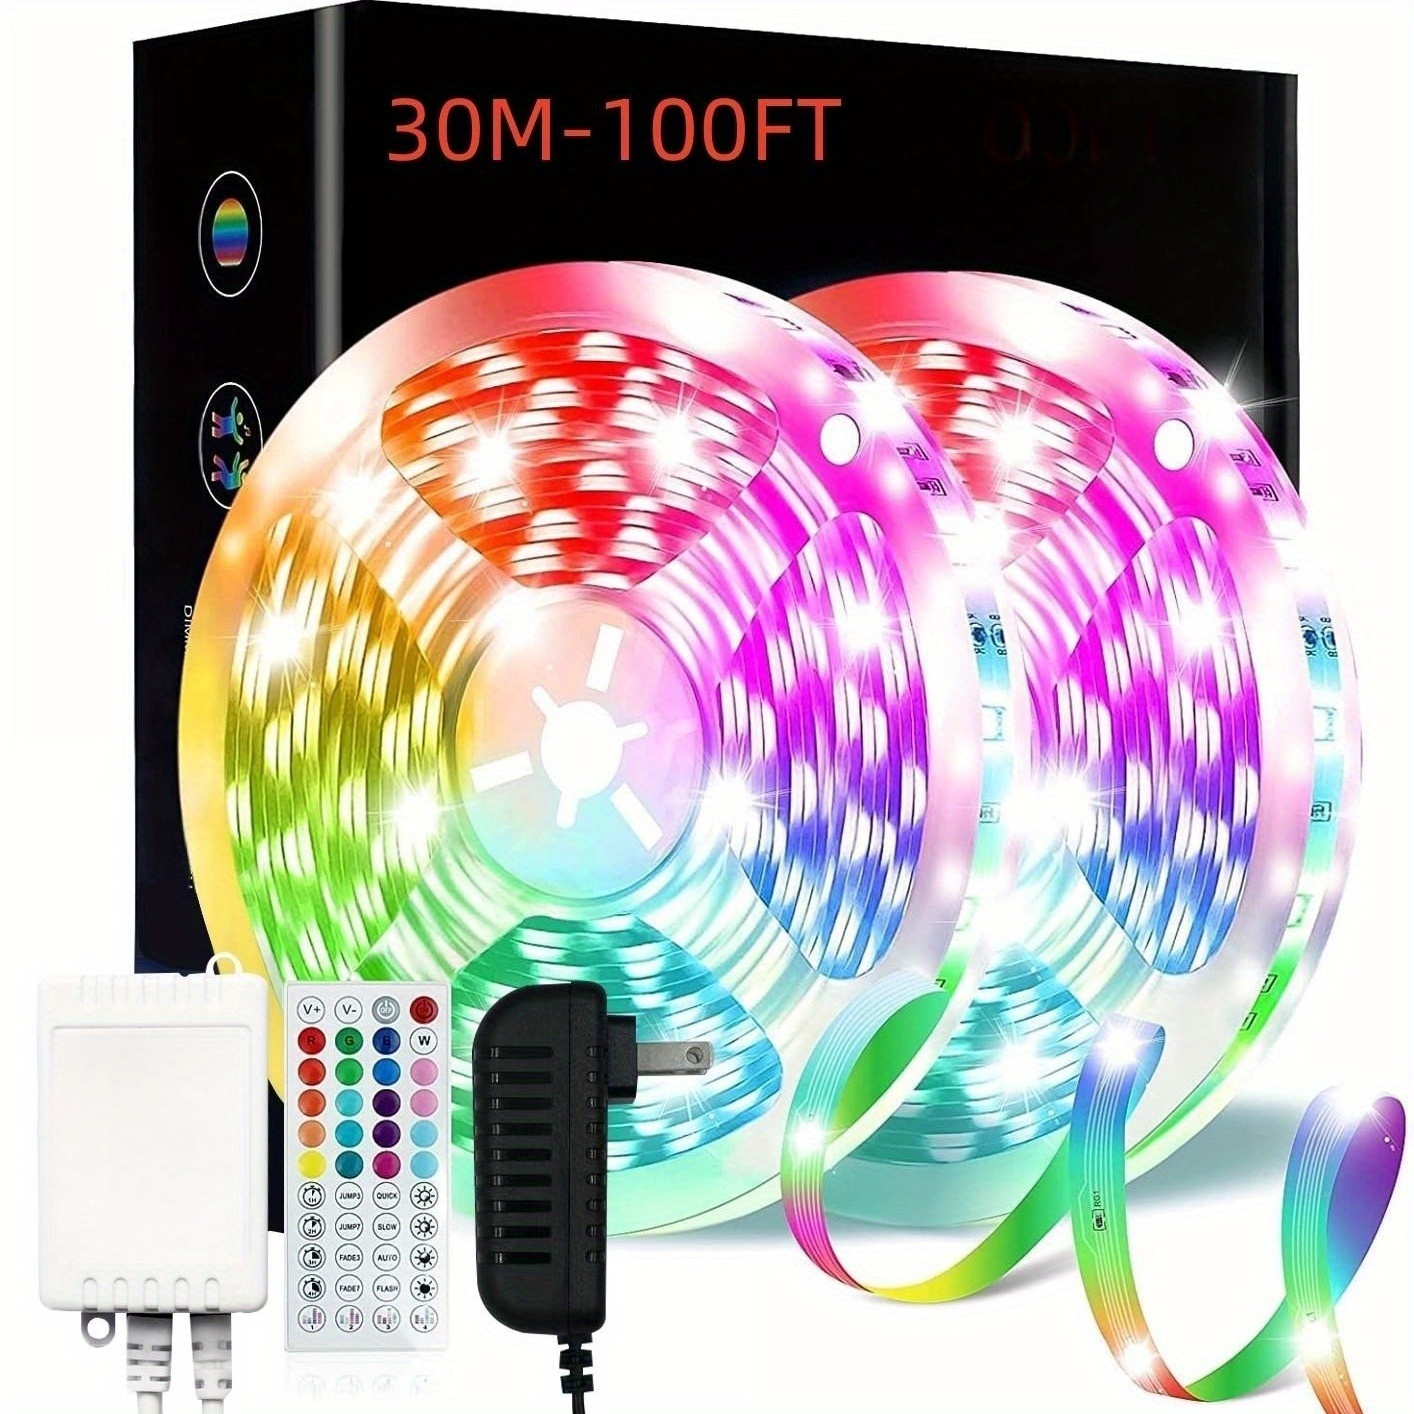 DAYBETTER 50ft Bluetooth LED Strip Lights,Music Sync 5050 LED Light Strip RGB with Remote Control,Timer Schedule,Color Changing LED Lights for Bedroom